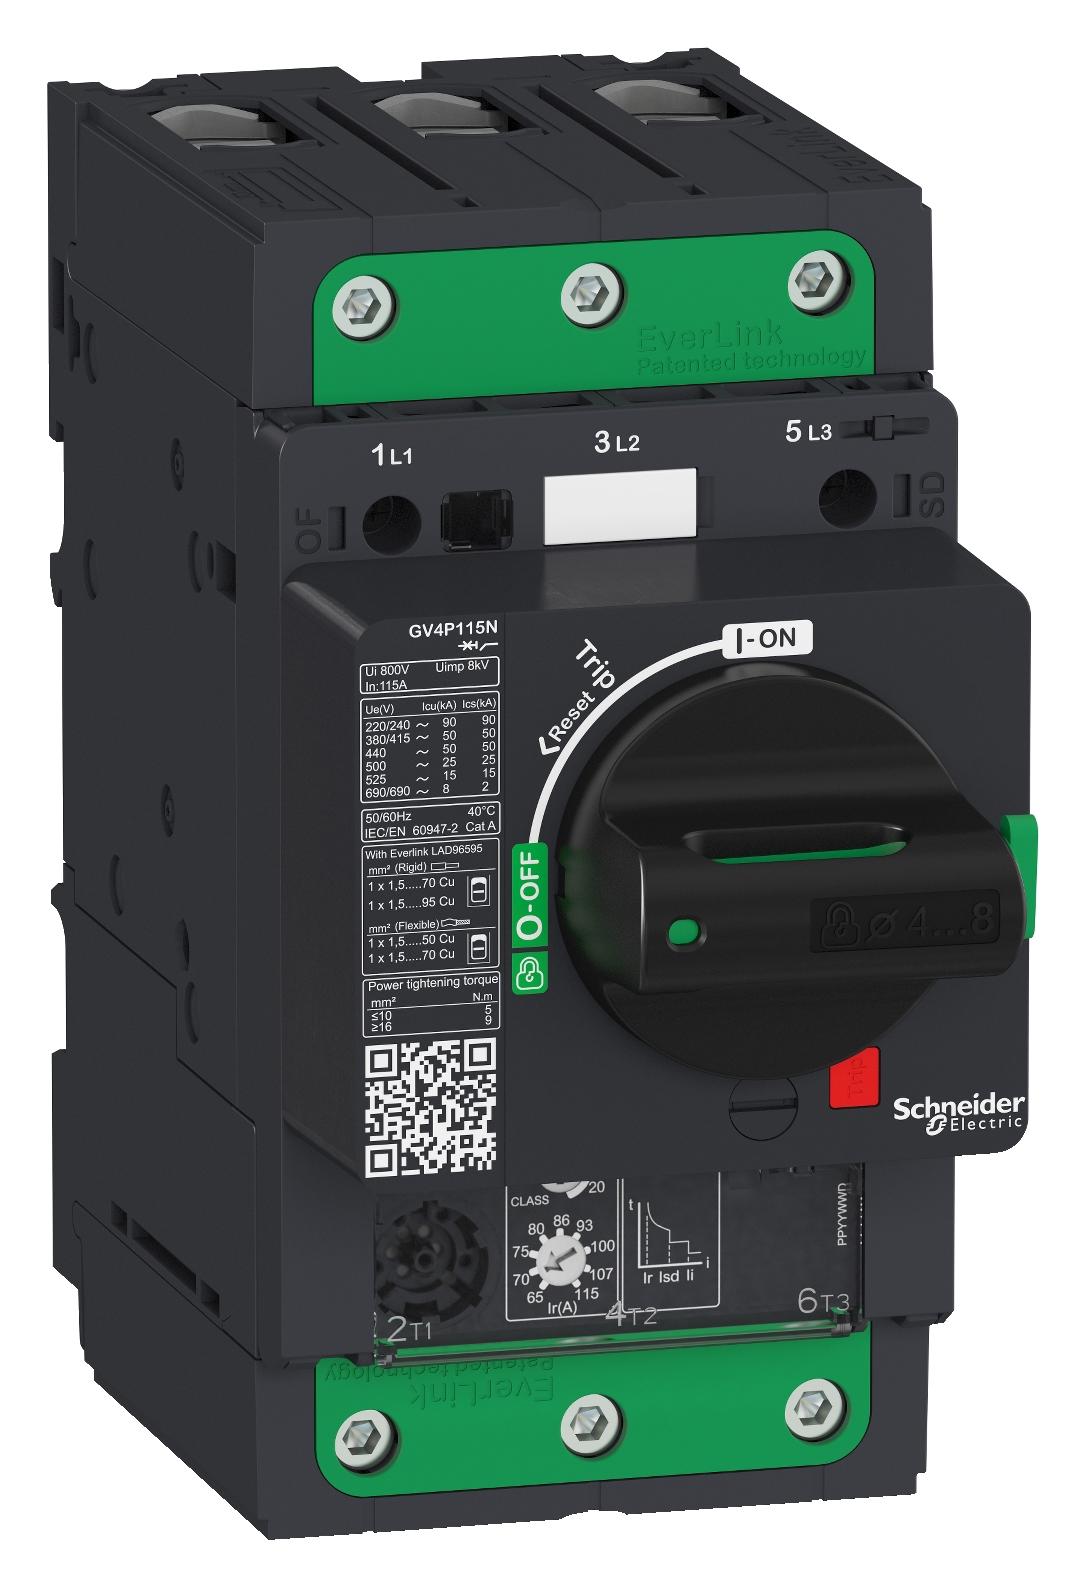 GV4P115B THERMOMAGNETIC CKT BREAKER, 3P, 115A SCHNEIDER ELECTRIC